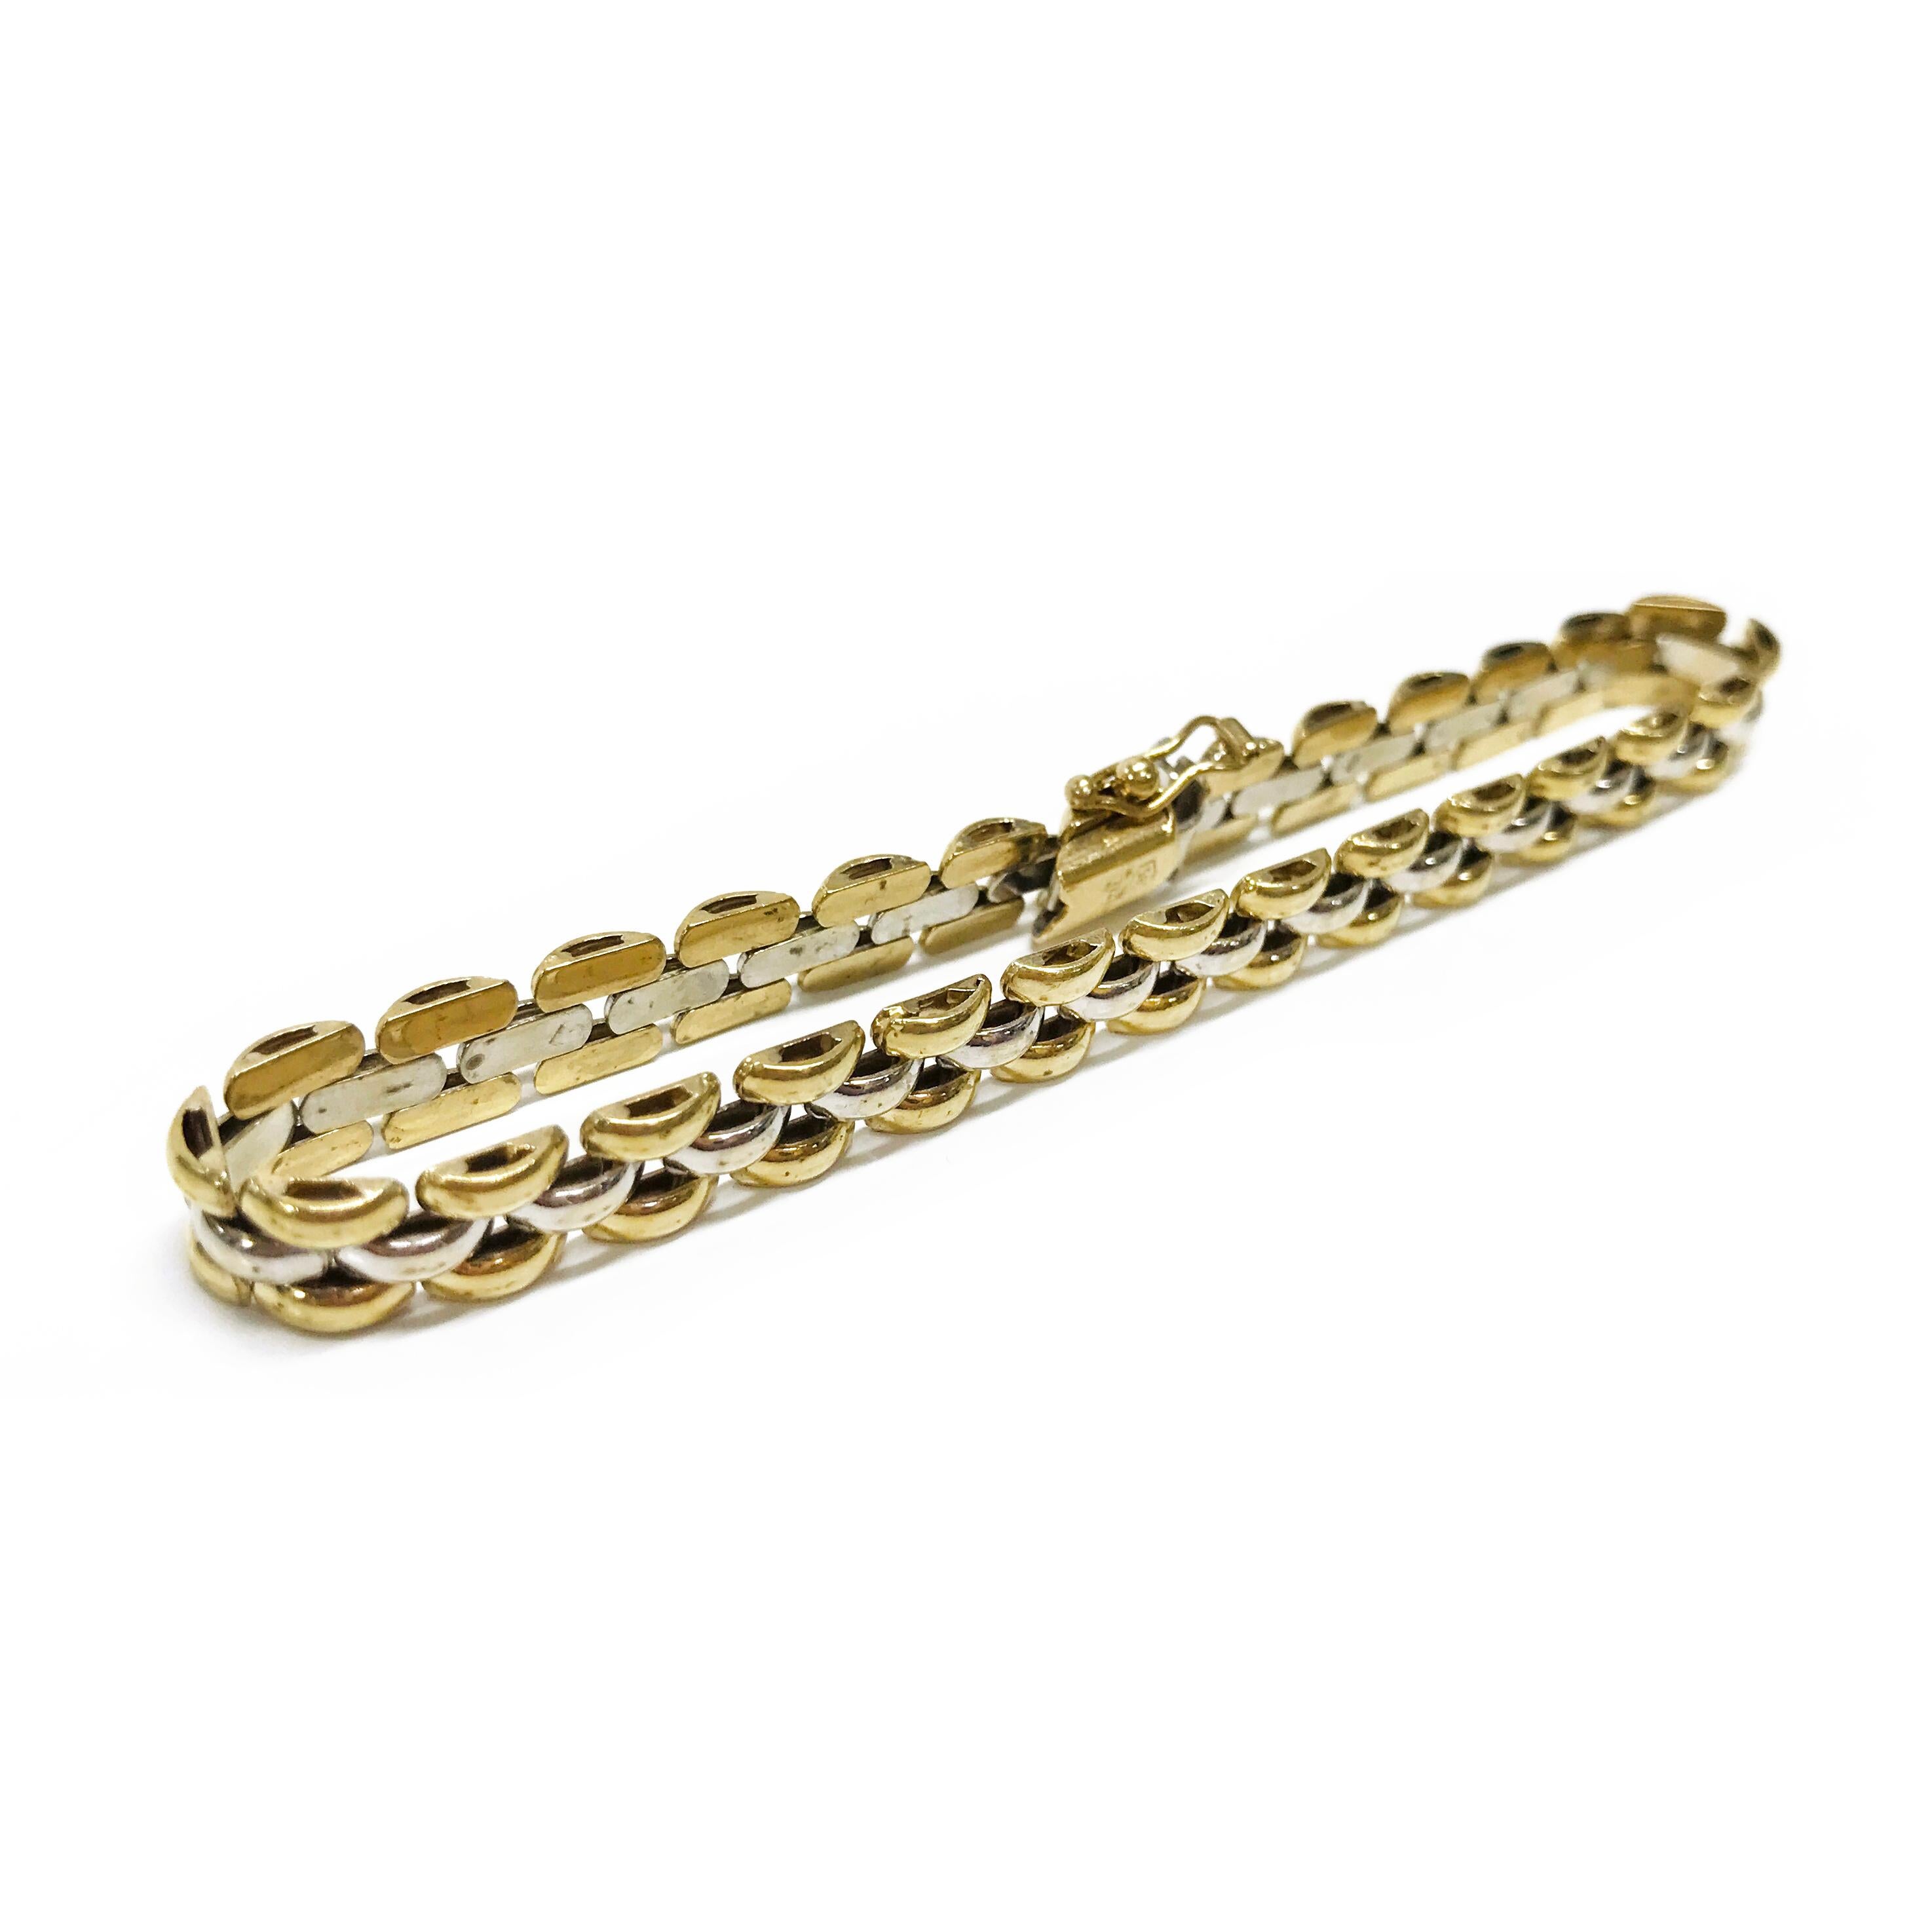 14 Karat two-tone panther-style link bracelet. This bracelet features 6mm white and yellow gold links. The bracelet is 7 3/4